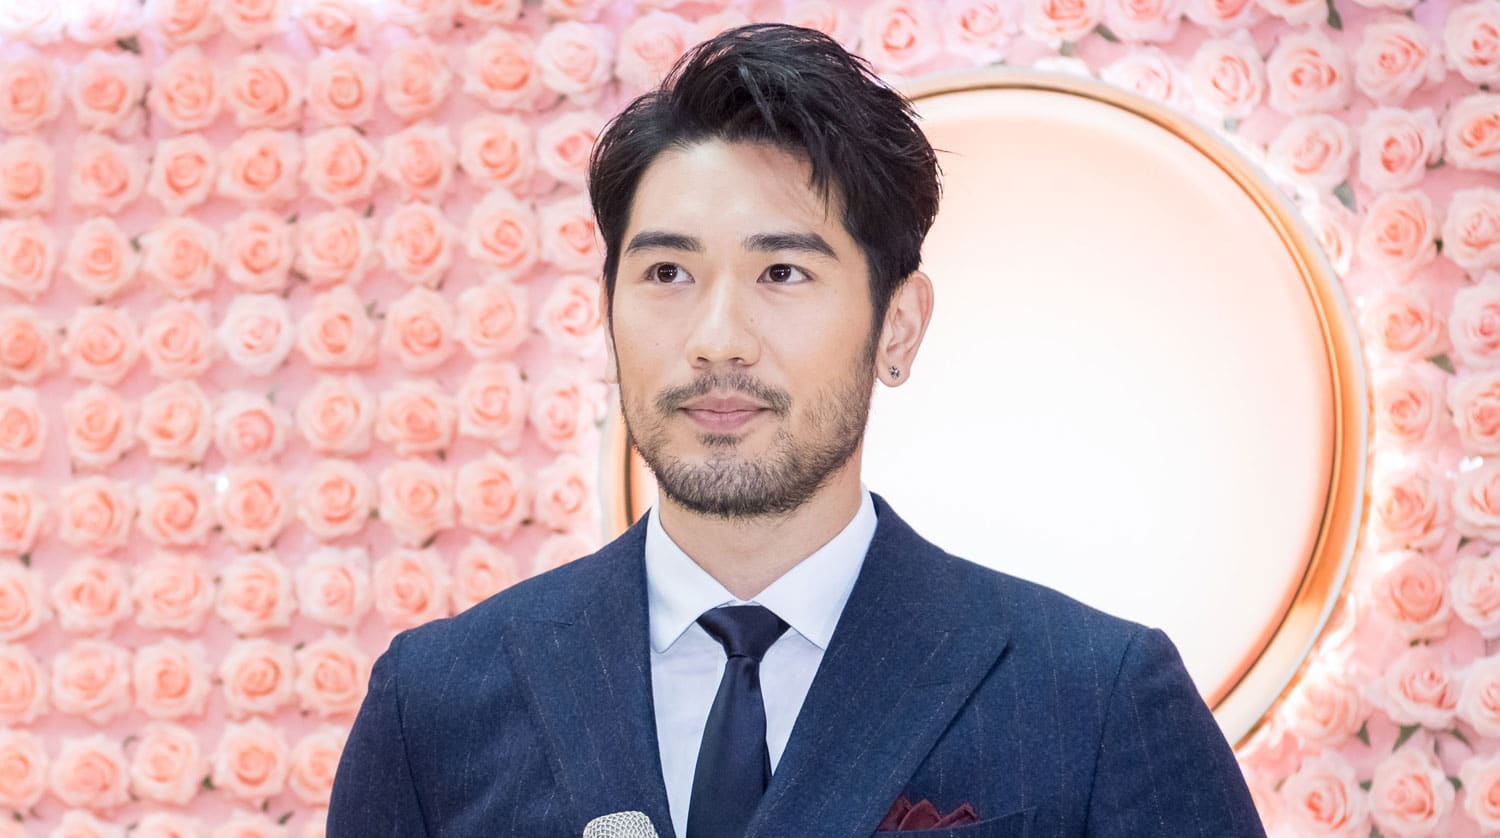 Godfrey Gao's Furious Fan Demands Official Apology and Complete Ban on "Chase Me"